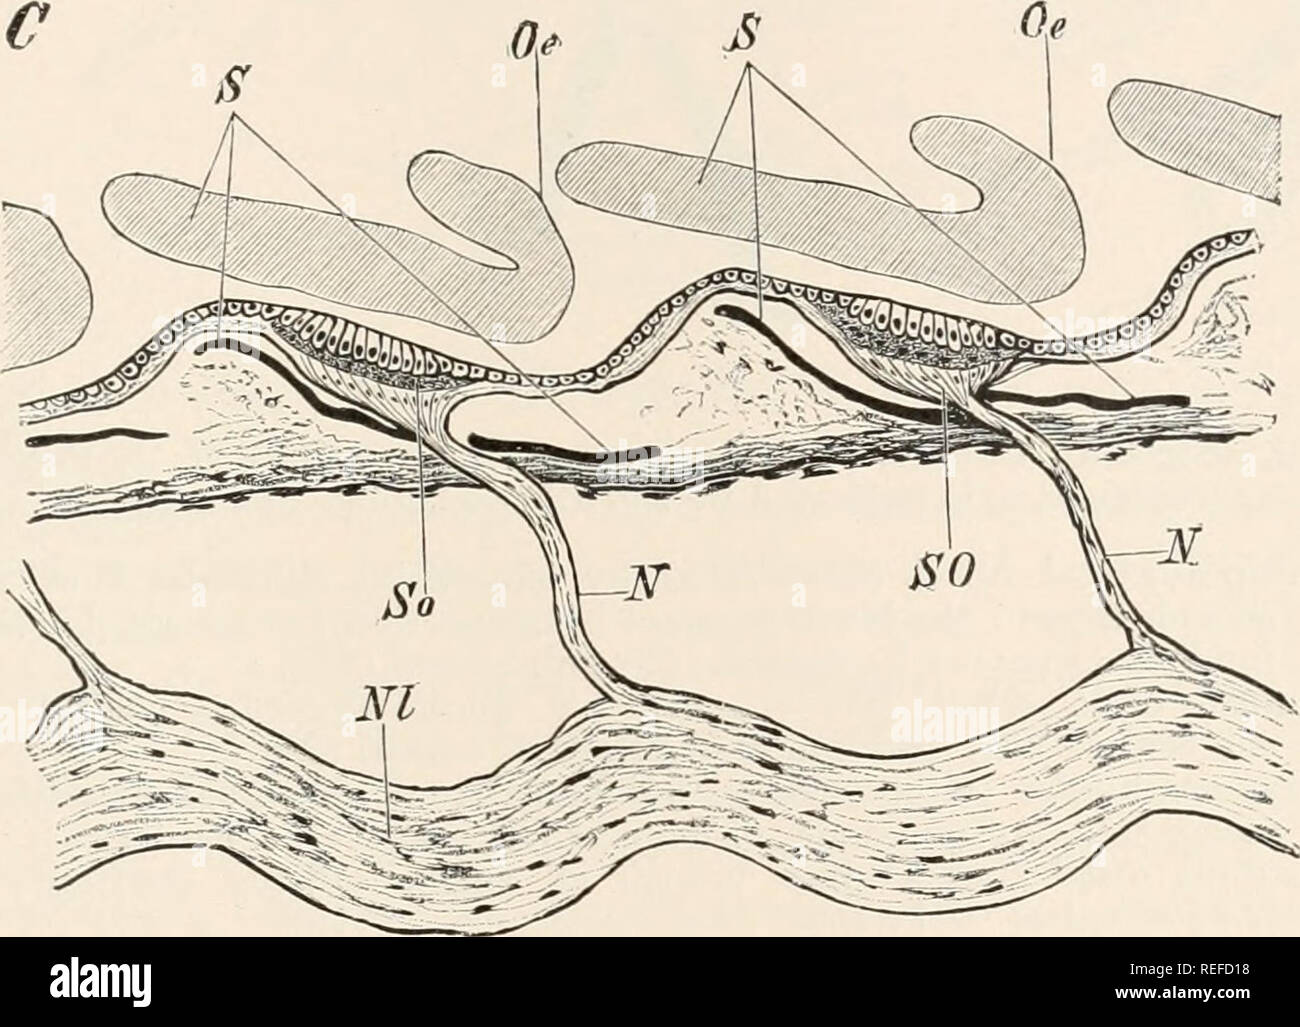 . Comparative anatomy of vertebrates. Anatomy, Comparative; Vertebrates. FIG. 184, A.—LONGITUDINAL VERTICAL SECTION OF THE SKIN AND A LATERAL LINE ORGAN OF Triton rrixtninx DURING THE BREEDING SEASON, WHEN THE ANIMAL LIVES IN THE WATER. (After Maurer.) A E and JE, external and internal layers of epiderm abutting against the sensory organs; BG, blood-vessel; SN, nerve; SZ, sensory cells; StZ,.supporting ctil 11: 13. —ISOLATED SUPPORTING (StZ) AND SENSORY (SZ) CELLS FROM A LATERAL LINE ORGAN OF TRITON. C.—VERTICAL SECTION THROUGH THE LATERAL CANAL OF Amia talva. (After Allis ; slightly modified. Stock Photo